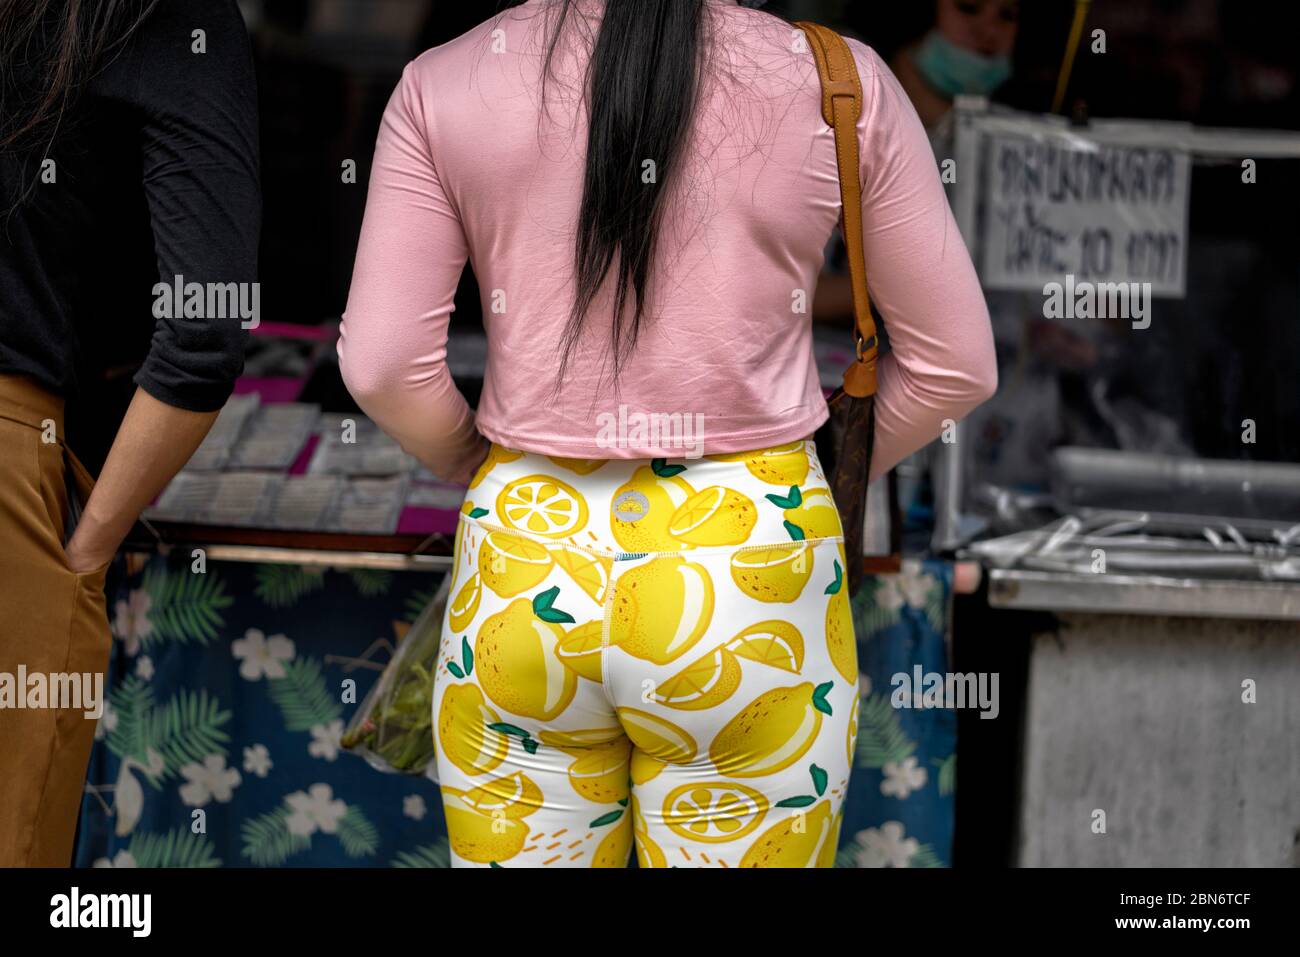 Leggings. Woman wearing colourful yellow patterned leggings. Thailand Southeast Asia Stock Photo